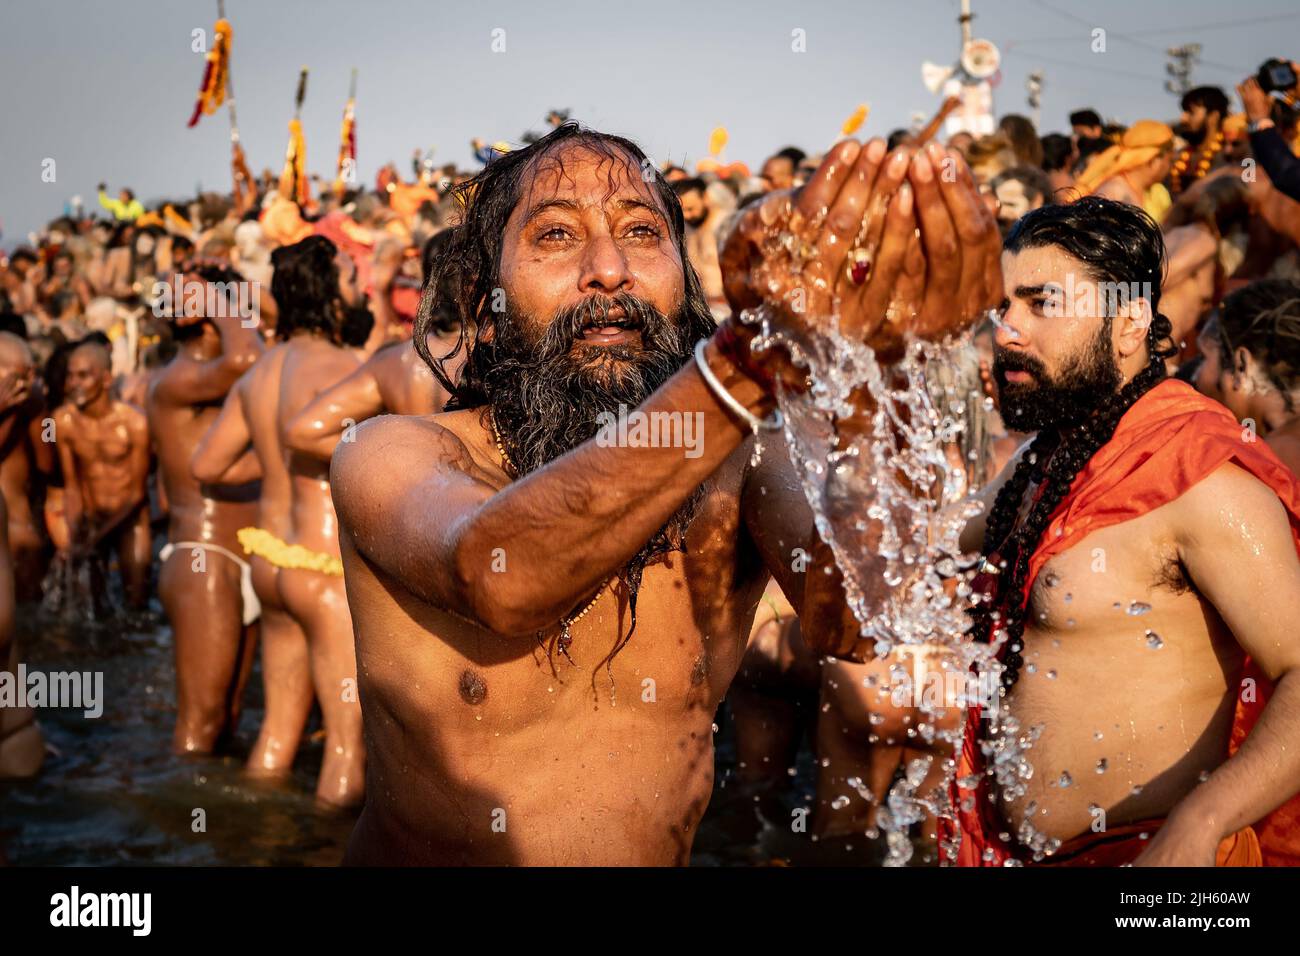 A Hindu worshipper praying and bathing in the sacred Ganges river with thousands of other devotees at the Kumbh Mela Festival in Allahabad, India. Stock Photo